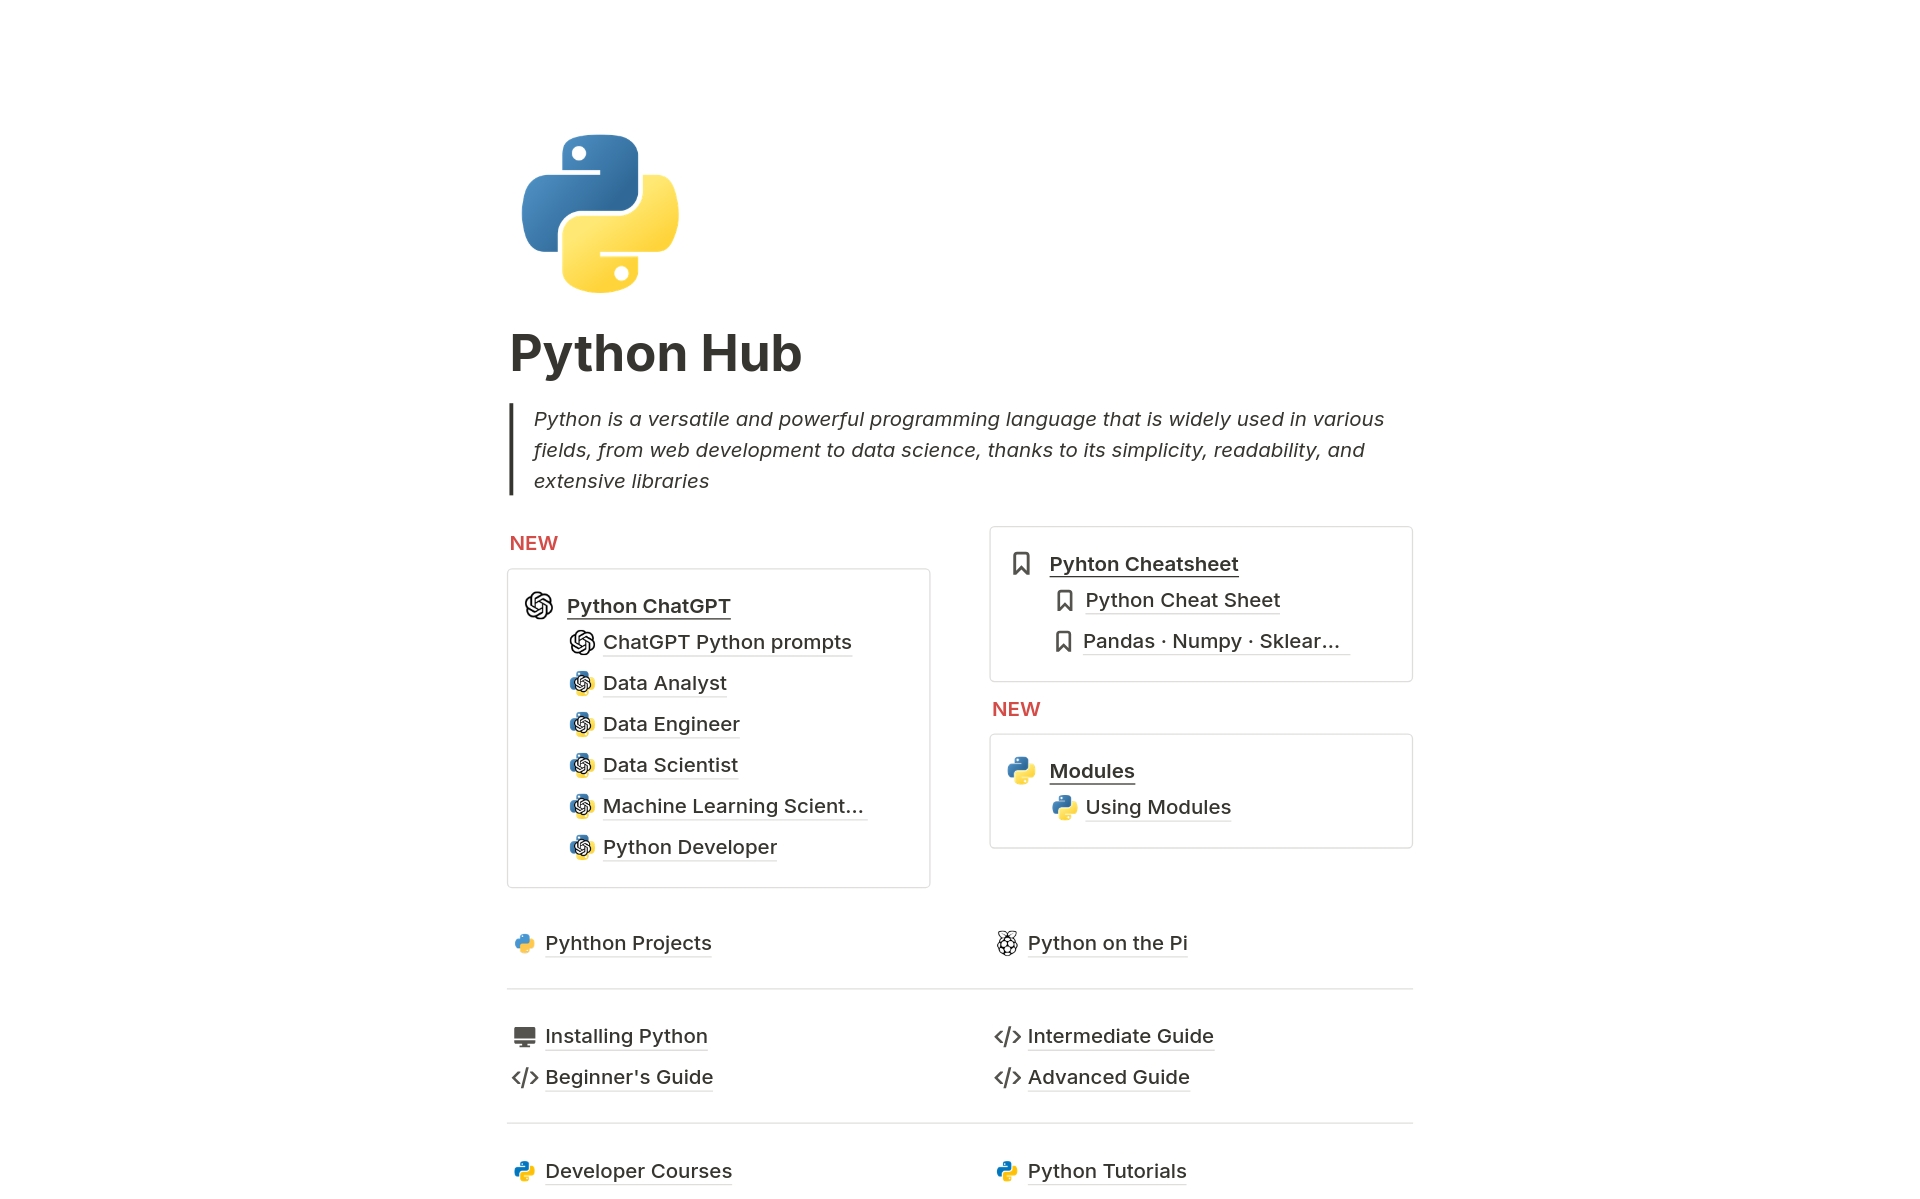 Capture and Organize all you Python Knowledge
Introducing the ultimate Python Mastery Template, meticulously crafted to empower your journey into the realm of Python programming. This comprehensive Notion template is designed to be your one-stop resource, 